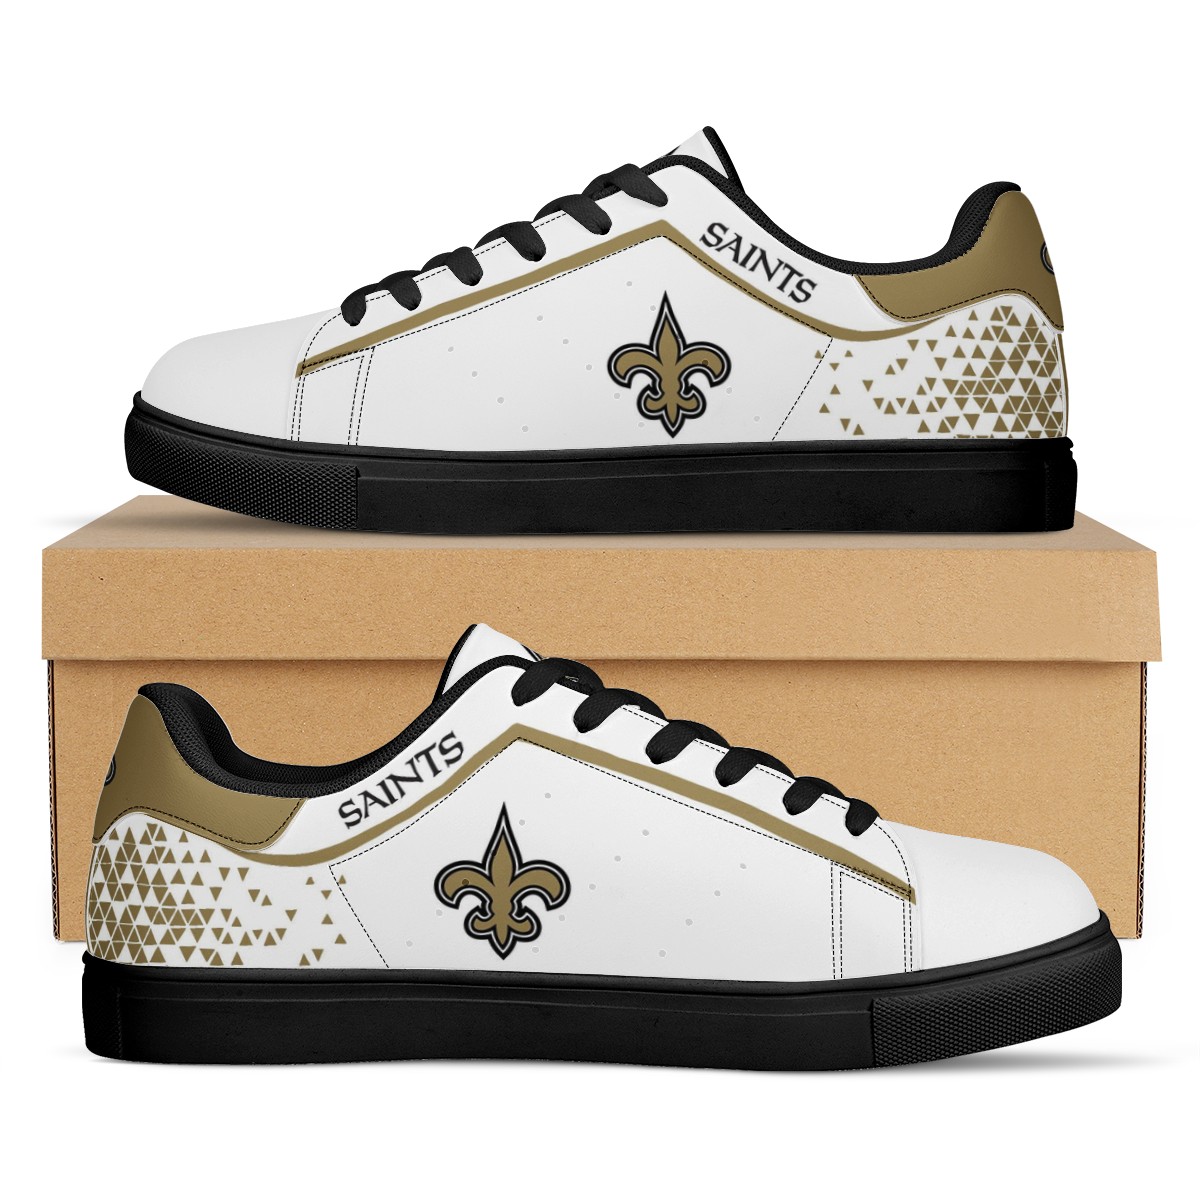 Women's New Orleans Saints Low Top Leather Sneakers 002